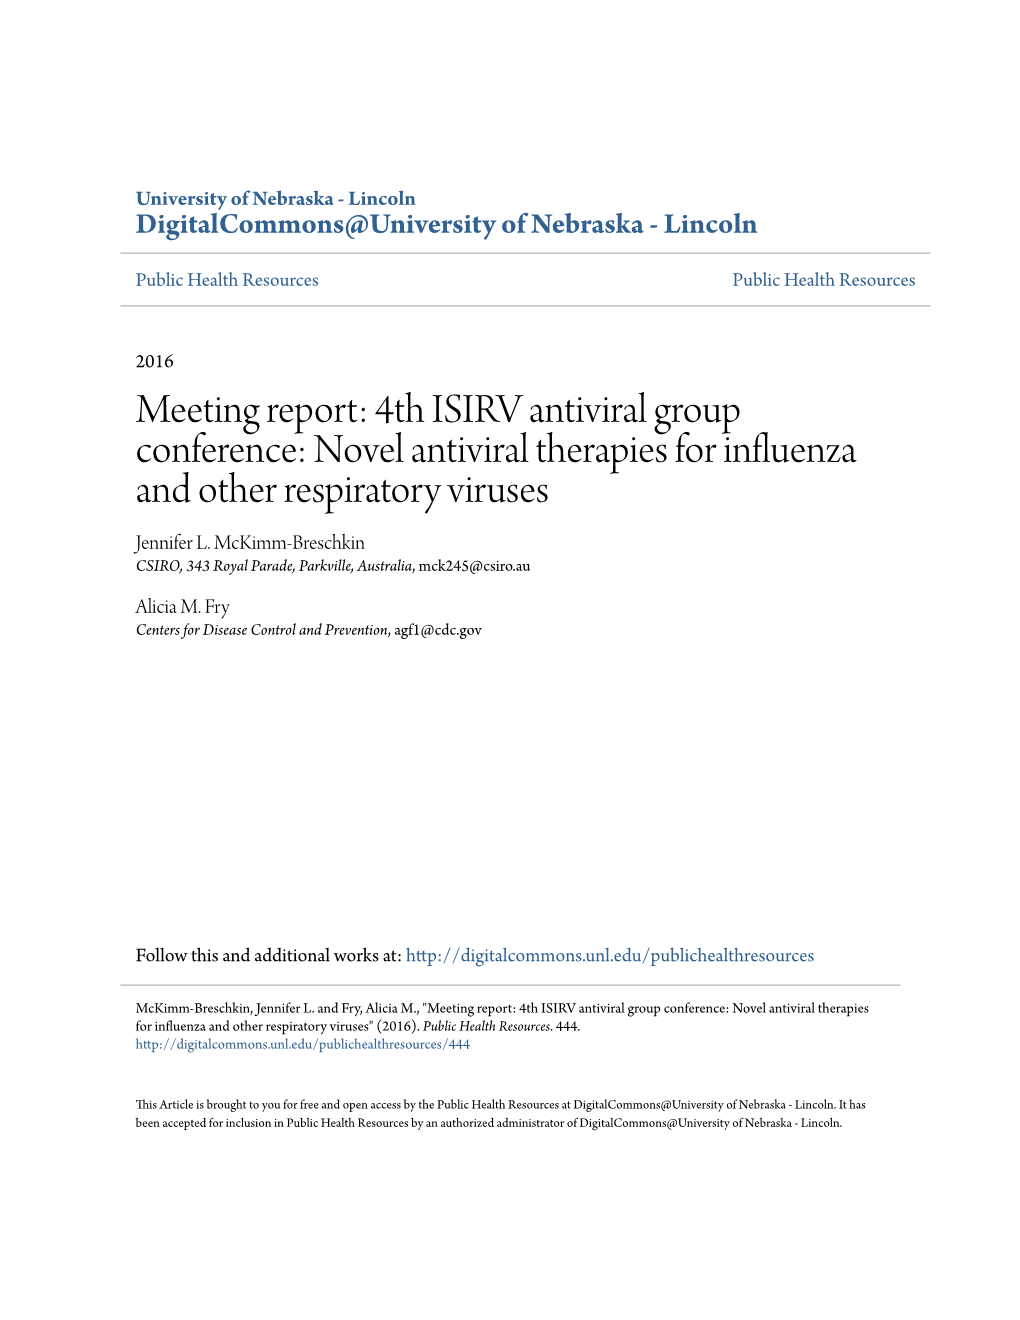 Novel Antiviral Therapies for Influenza and Other Respiratory Viruses Jennifer L